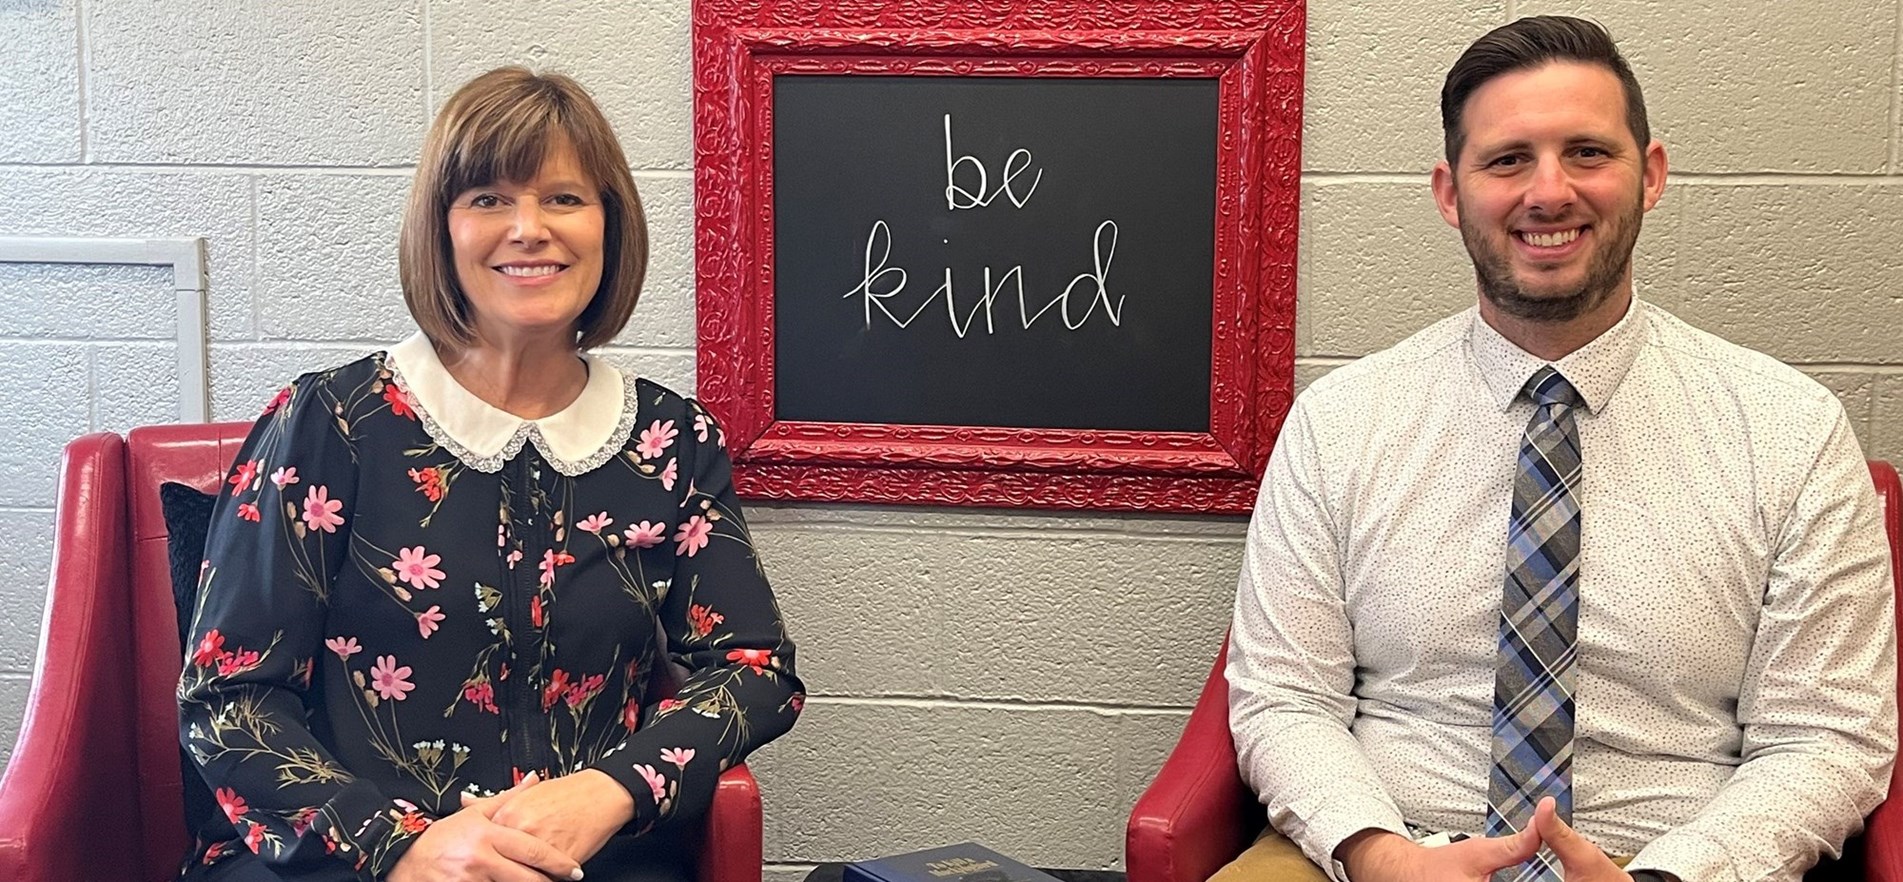 JMS Principal Mrs. Kris Almendinger & Dean of Students Nick Hancock seated in principal&#39;s office with framed message of &#34;Be Kind&#34; on the wall between them.